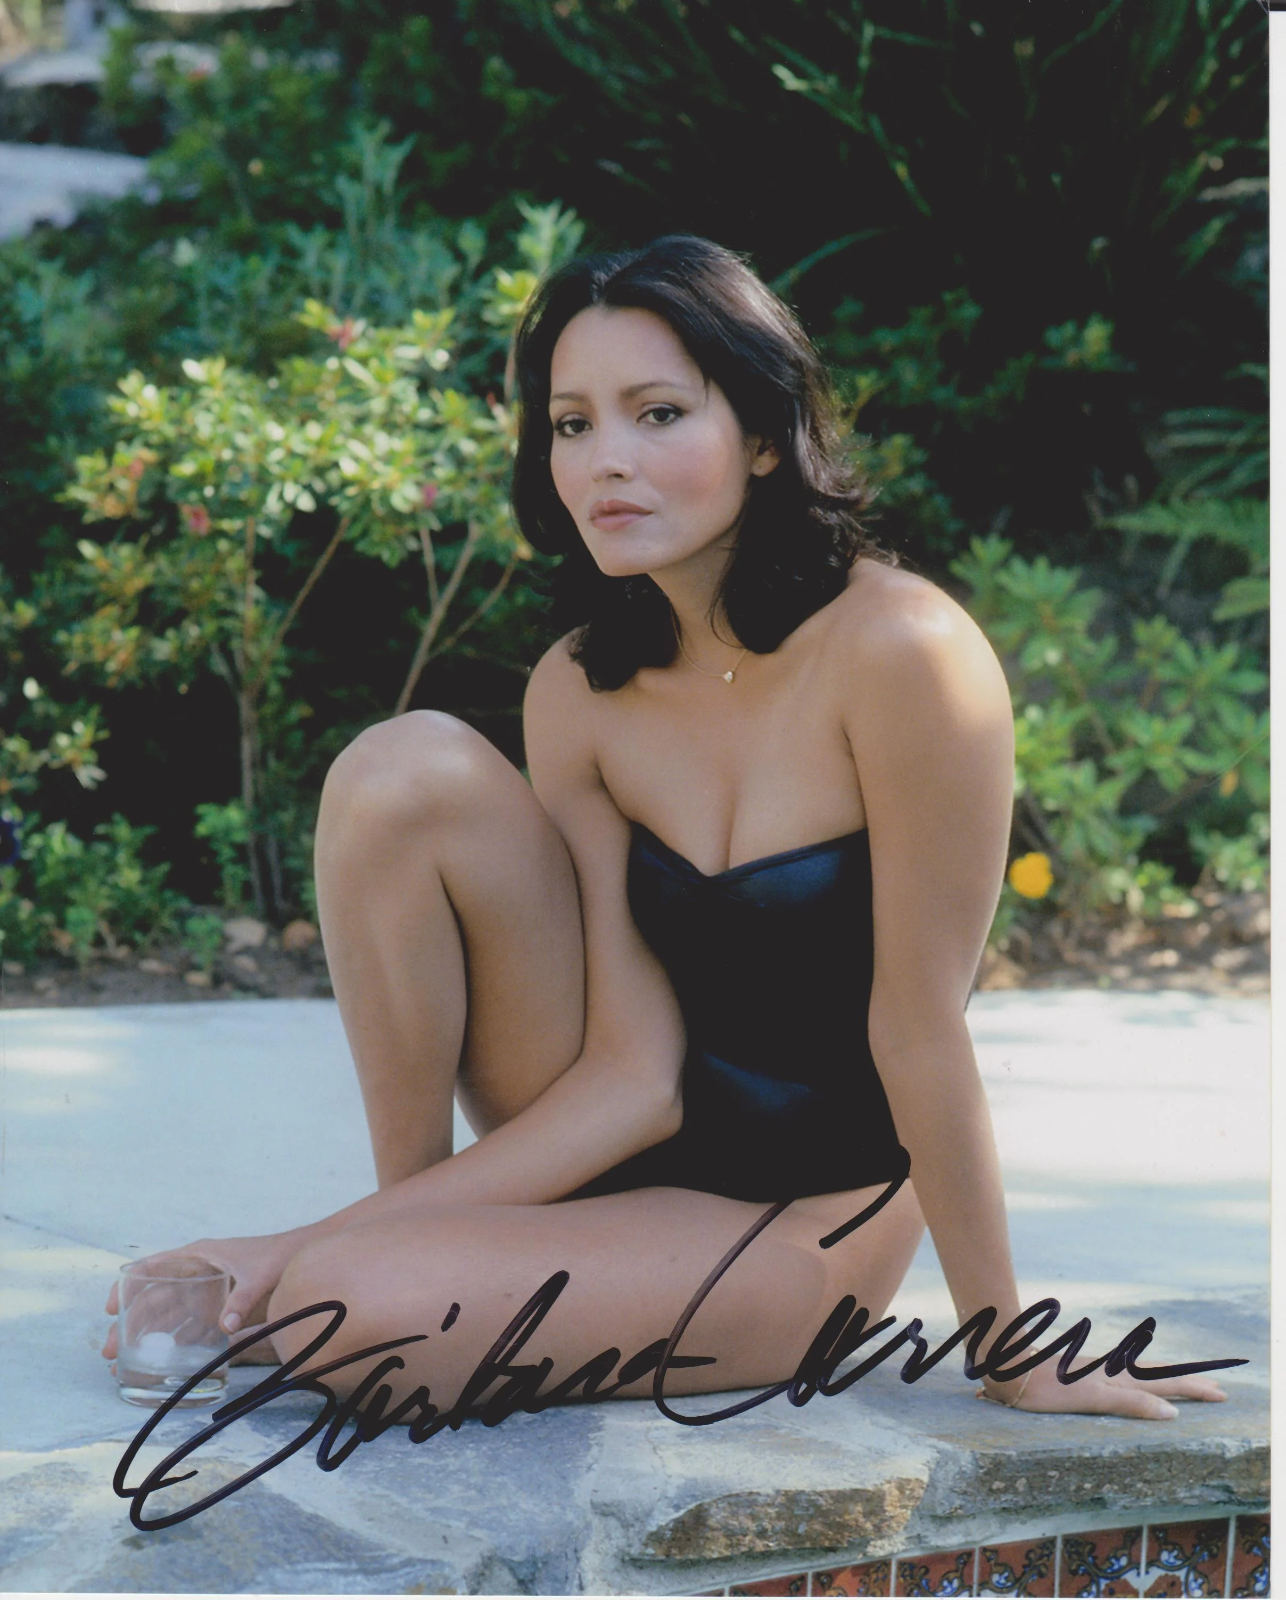 Barbara Carrera Original Autographed 8x10 Photo Poster painting #18 - NEVER SAY NEVER AGAIN